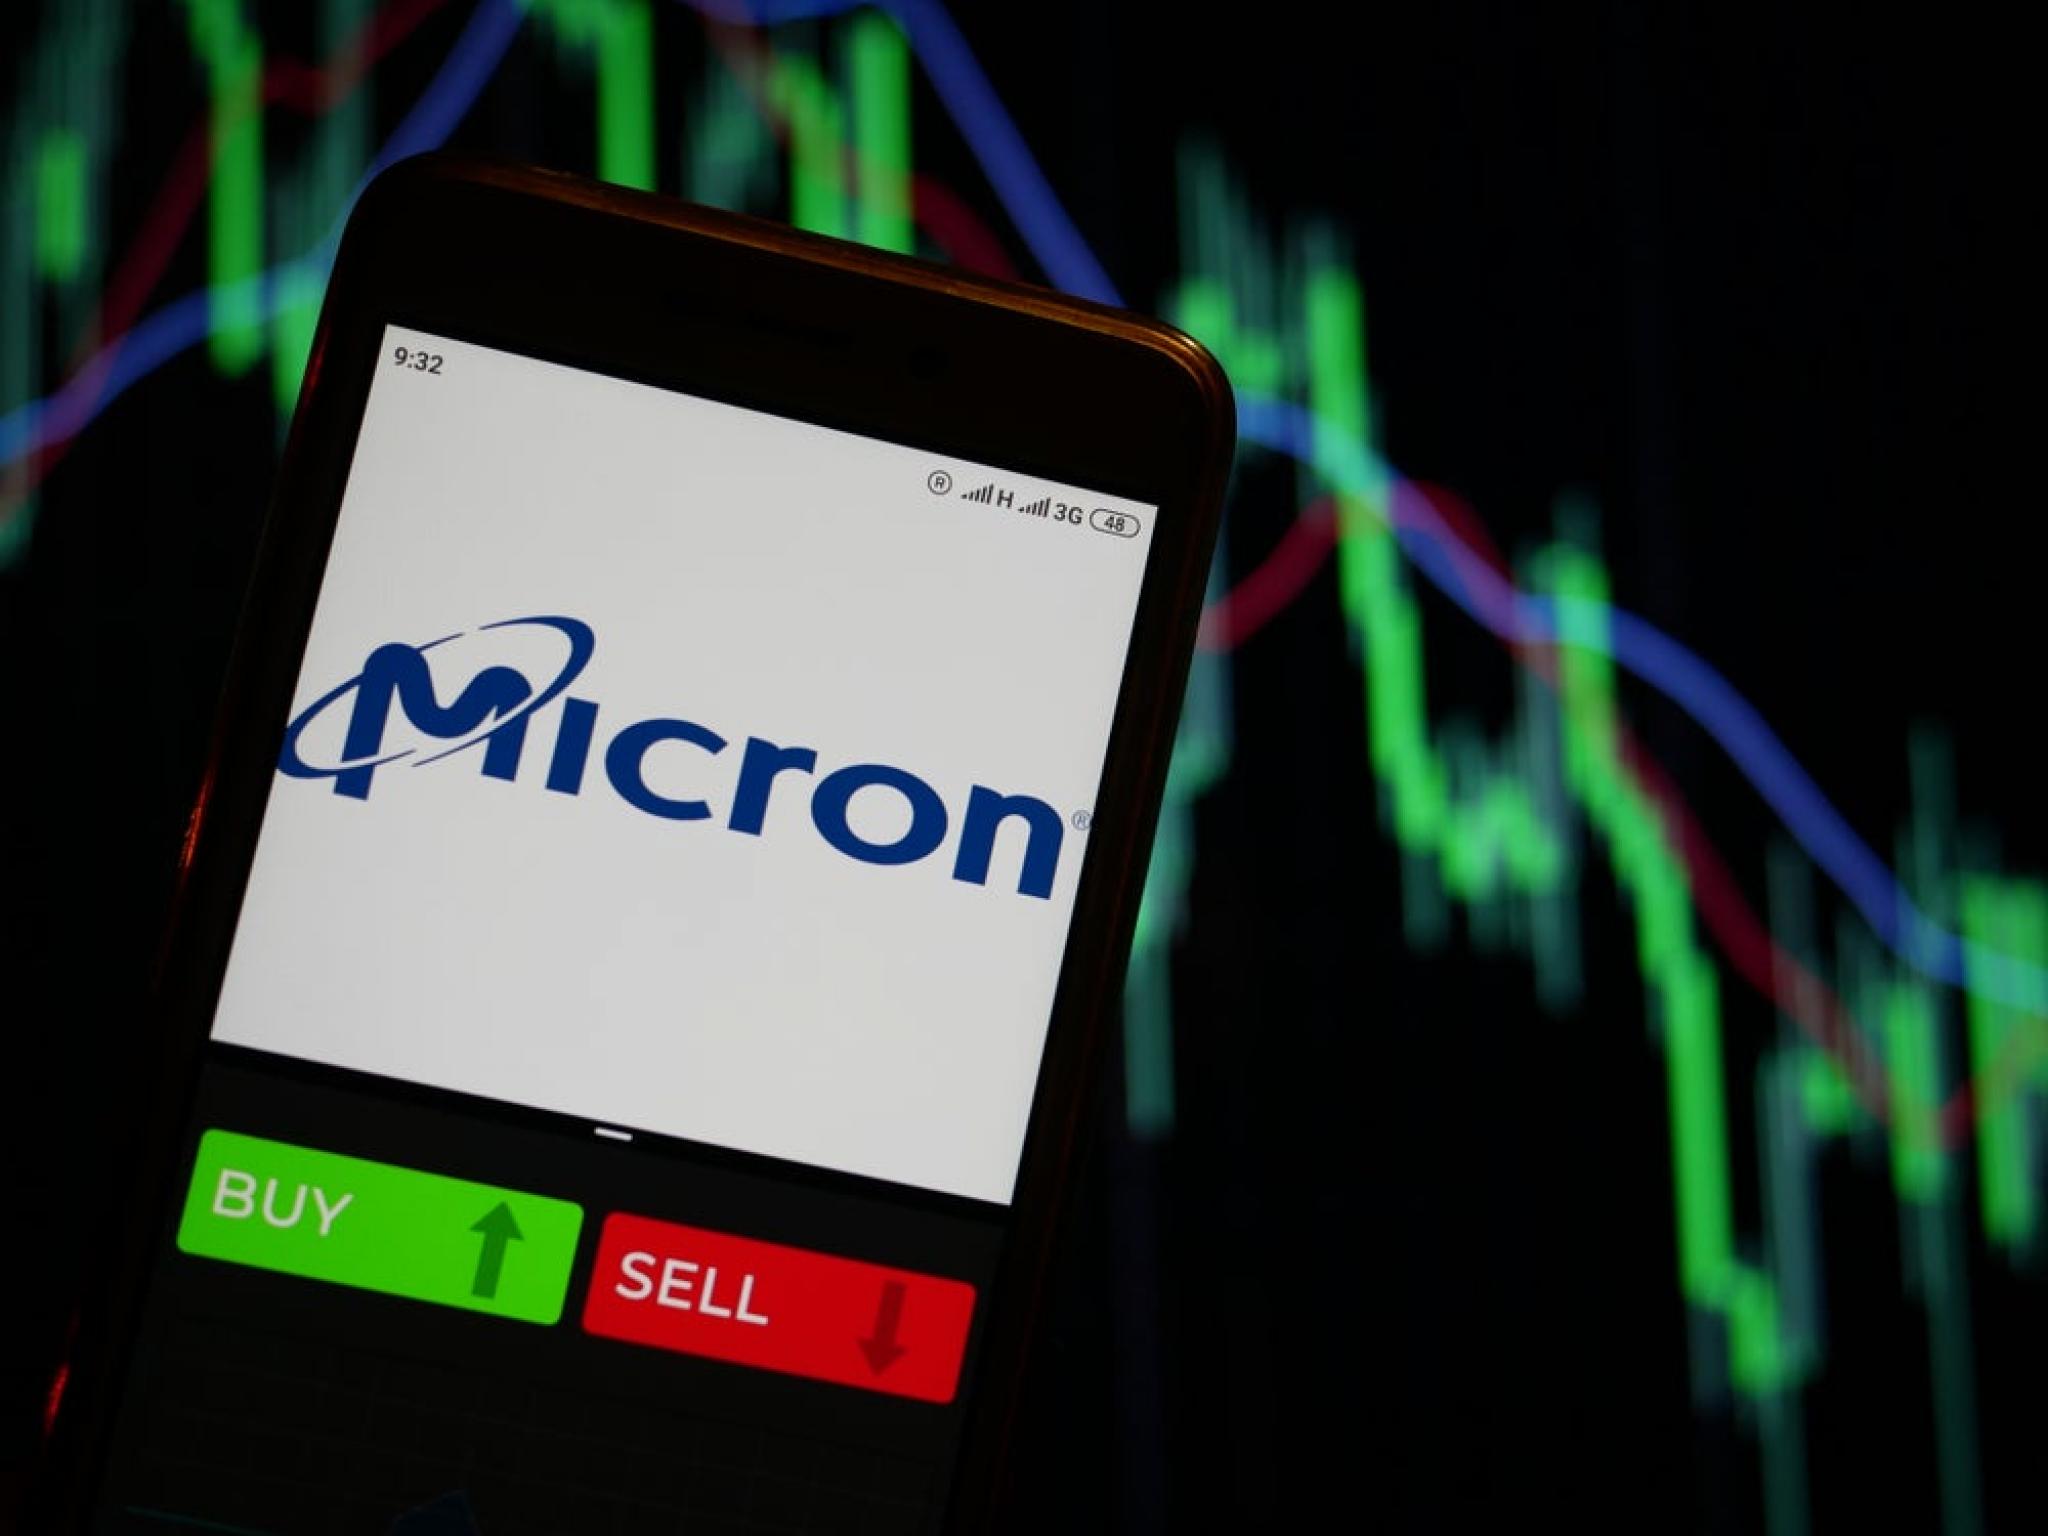  micron-to-rally-around-23-here-are-10-top-analyst-forecasts-for-monday 